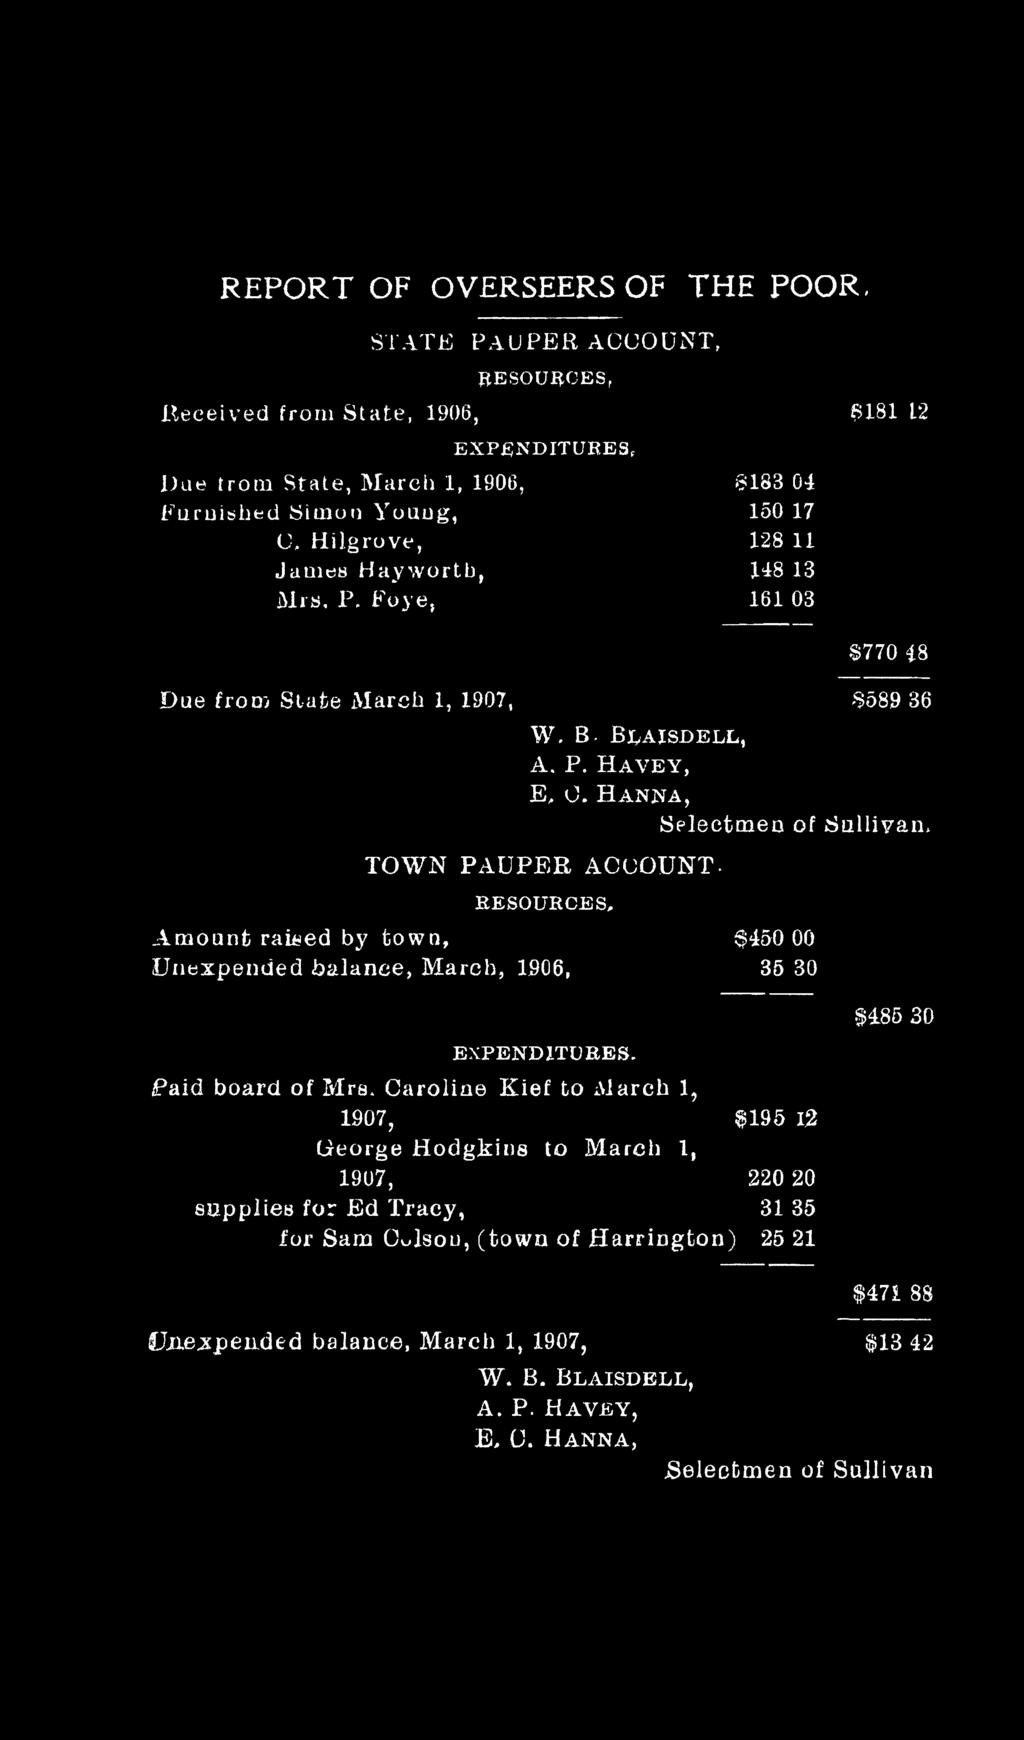 TOWN PAUPER ACCOUNT. RESOURCES. Amount raised by town, $450 00 Unexpended balance, March, 1906, 35 30 EXPENDITURES. Paid board of Mrs.